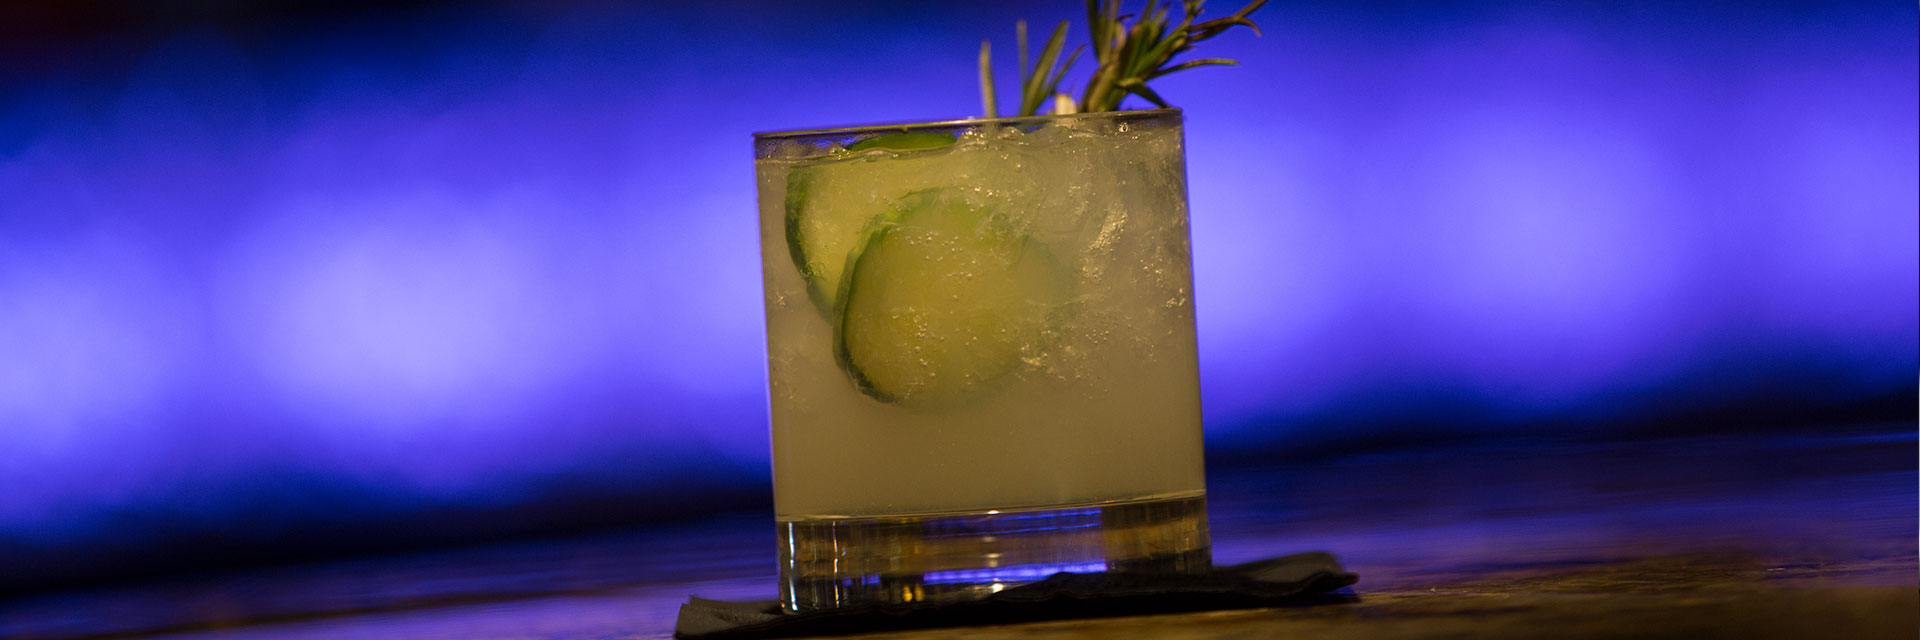 rosemary-cocktail-with-purple-background.jpg